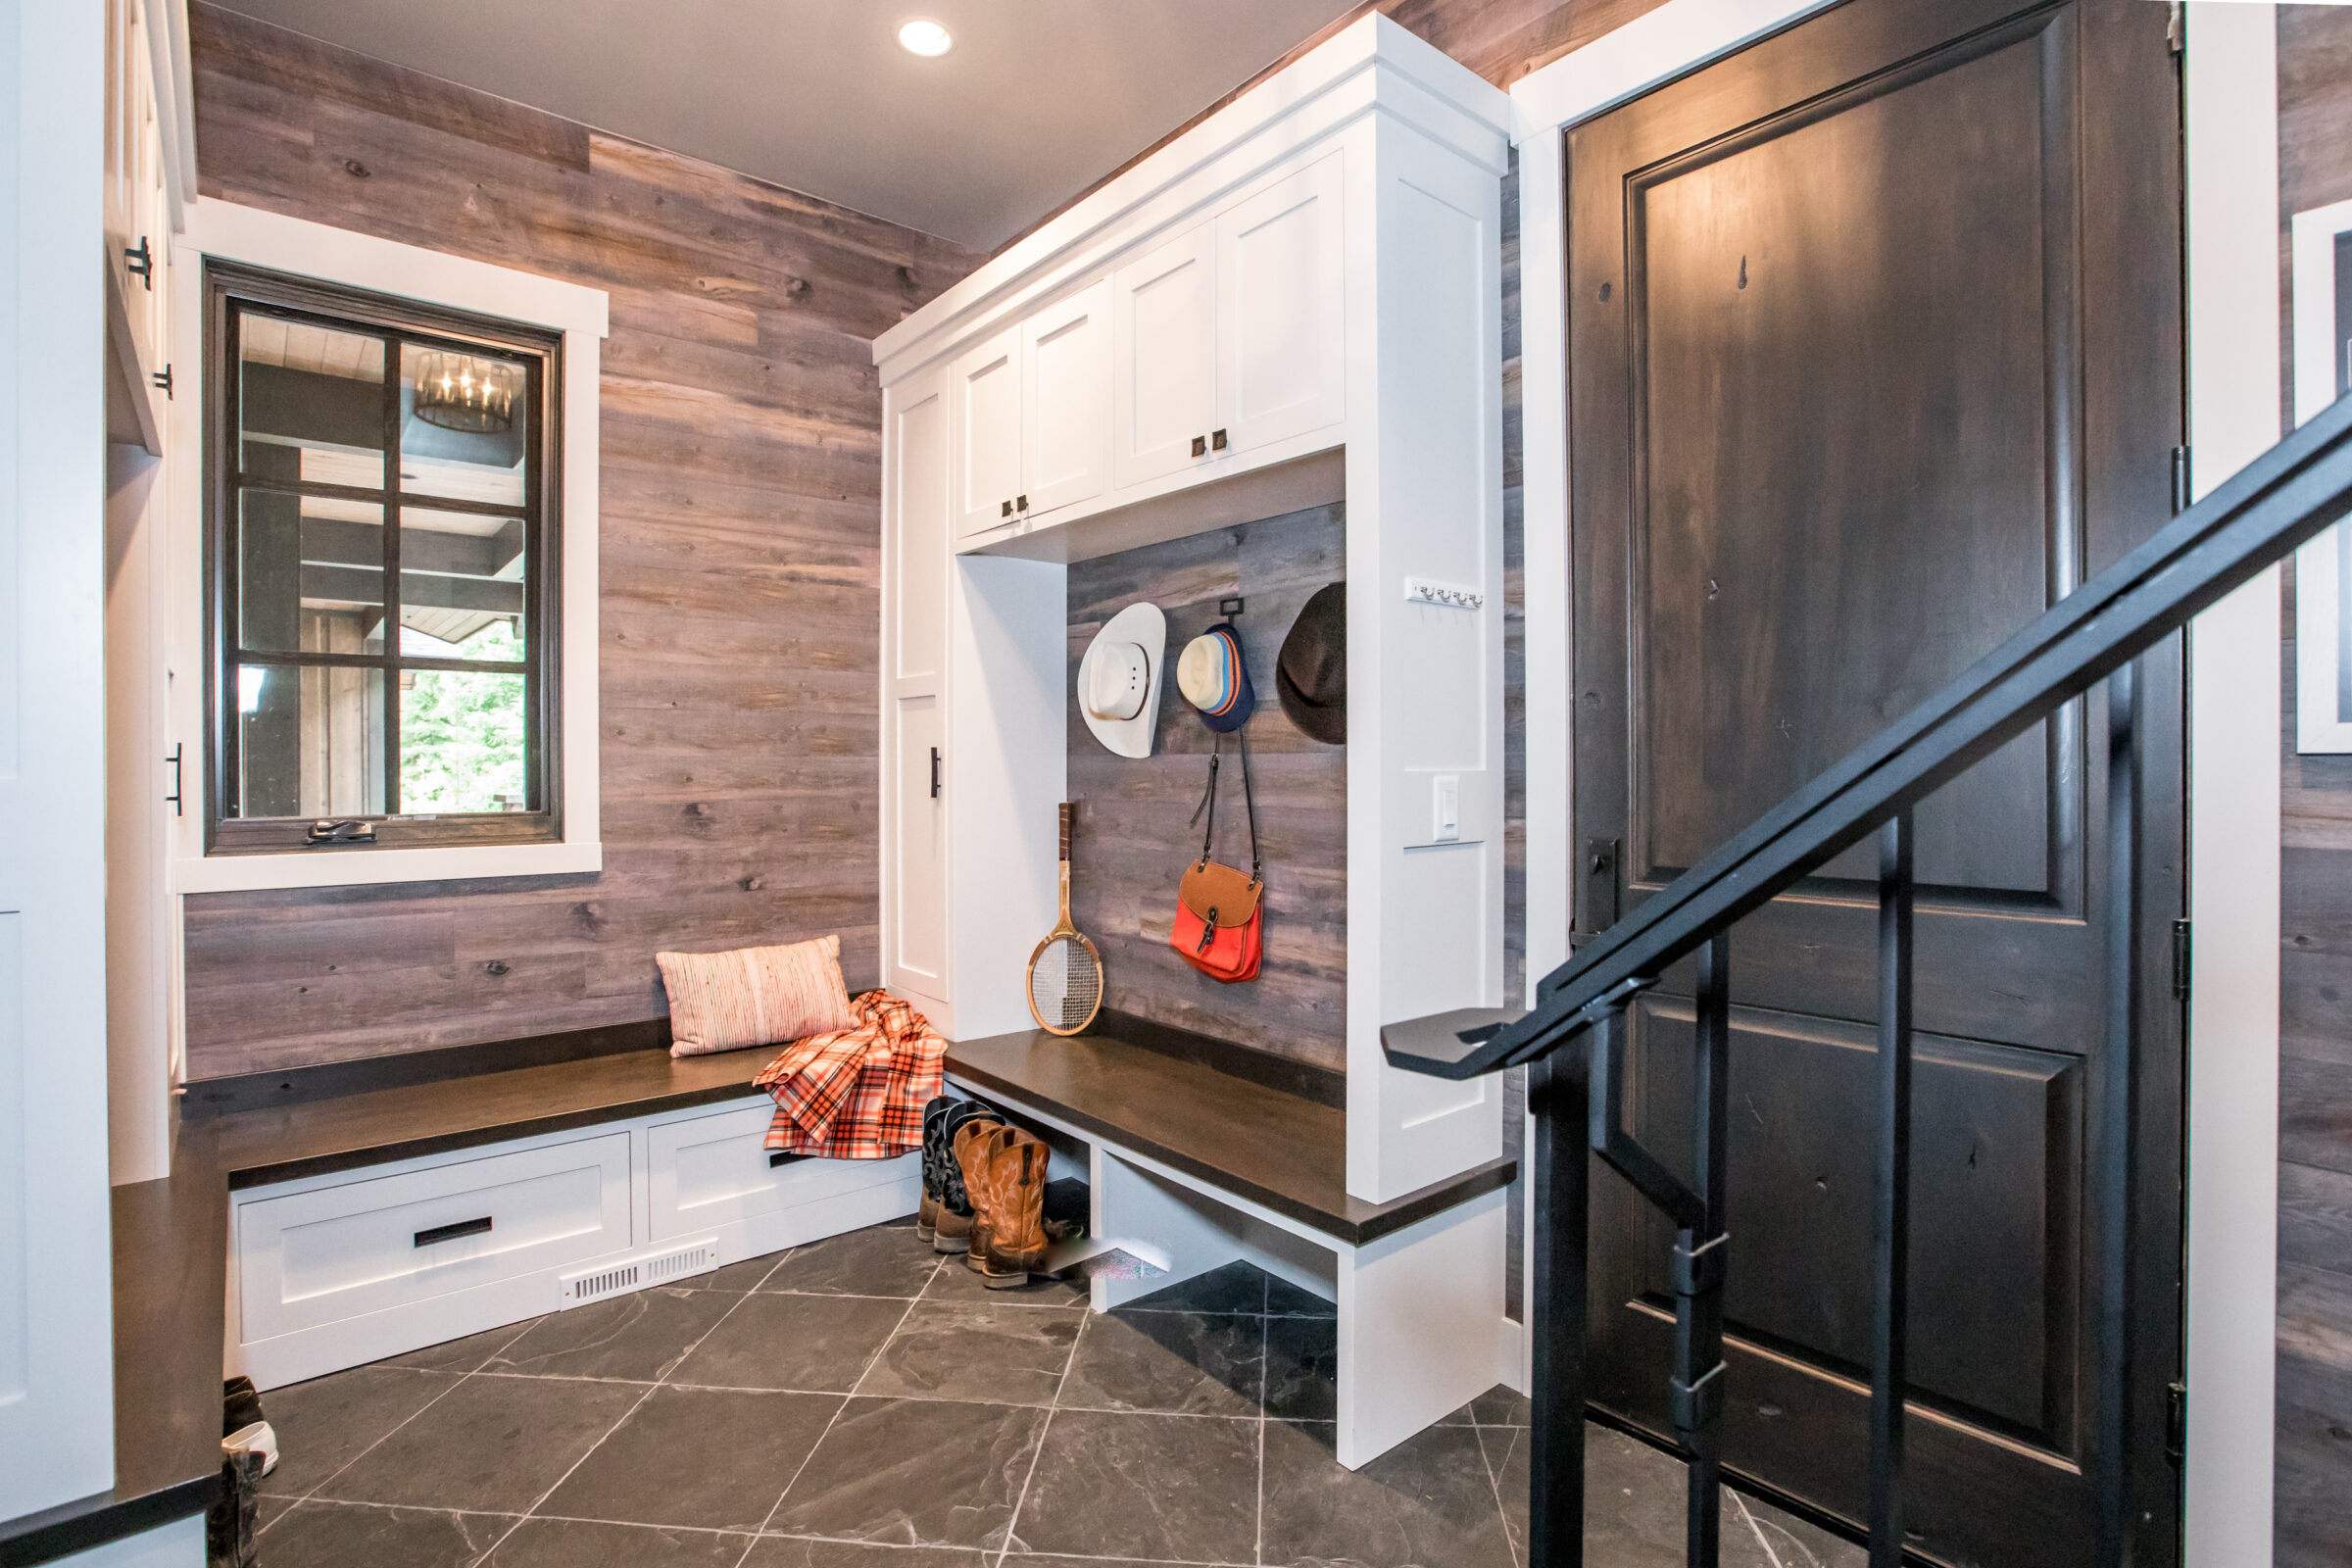 A rustic entryway features a built-in bench and storage, wooden walls, slate flooring, hats hanging, and a staircase with a black handrail.